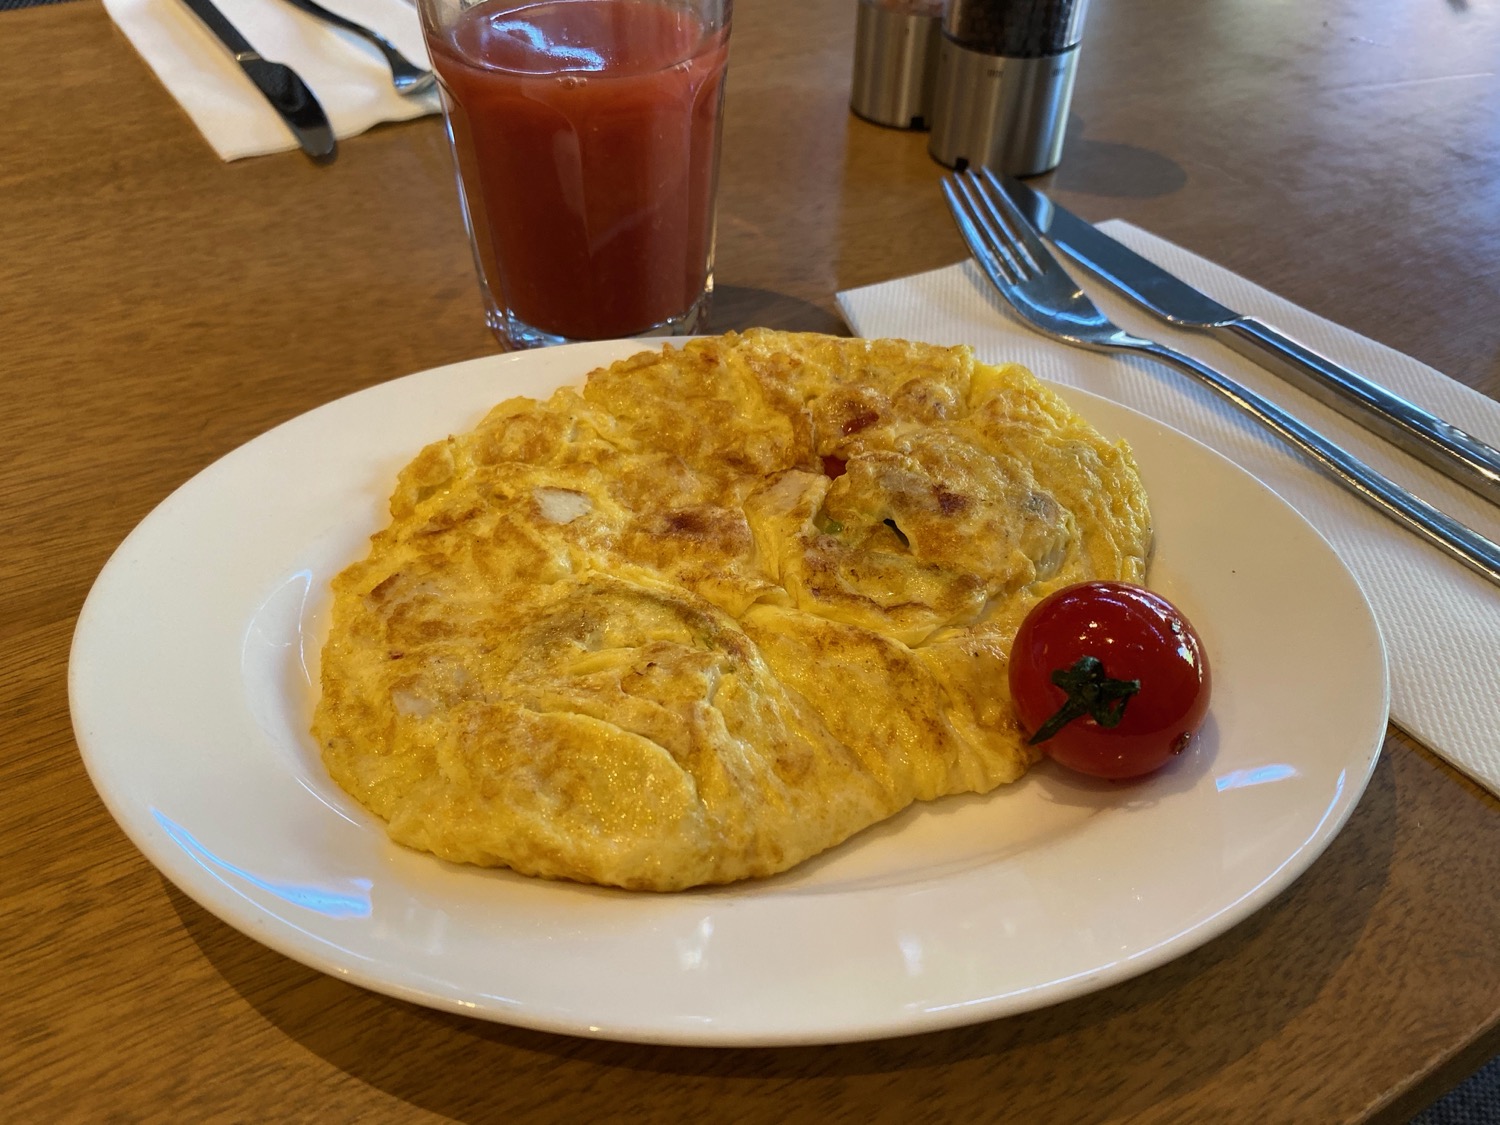 a plate of omelette with a cherry tomato on it